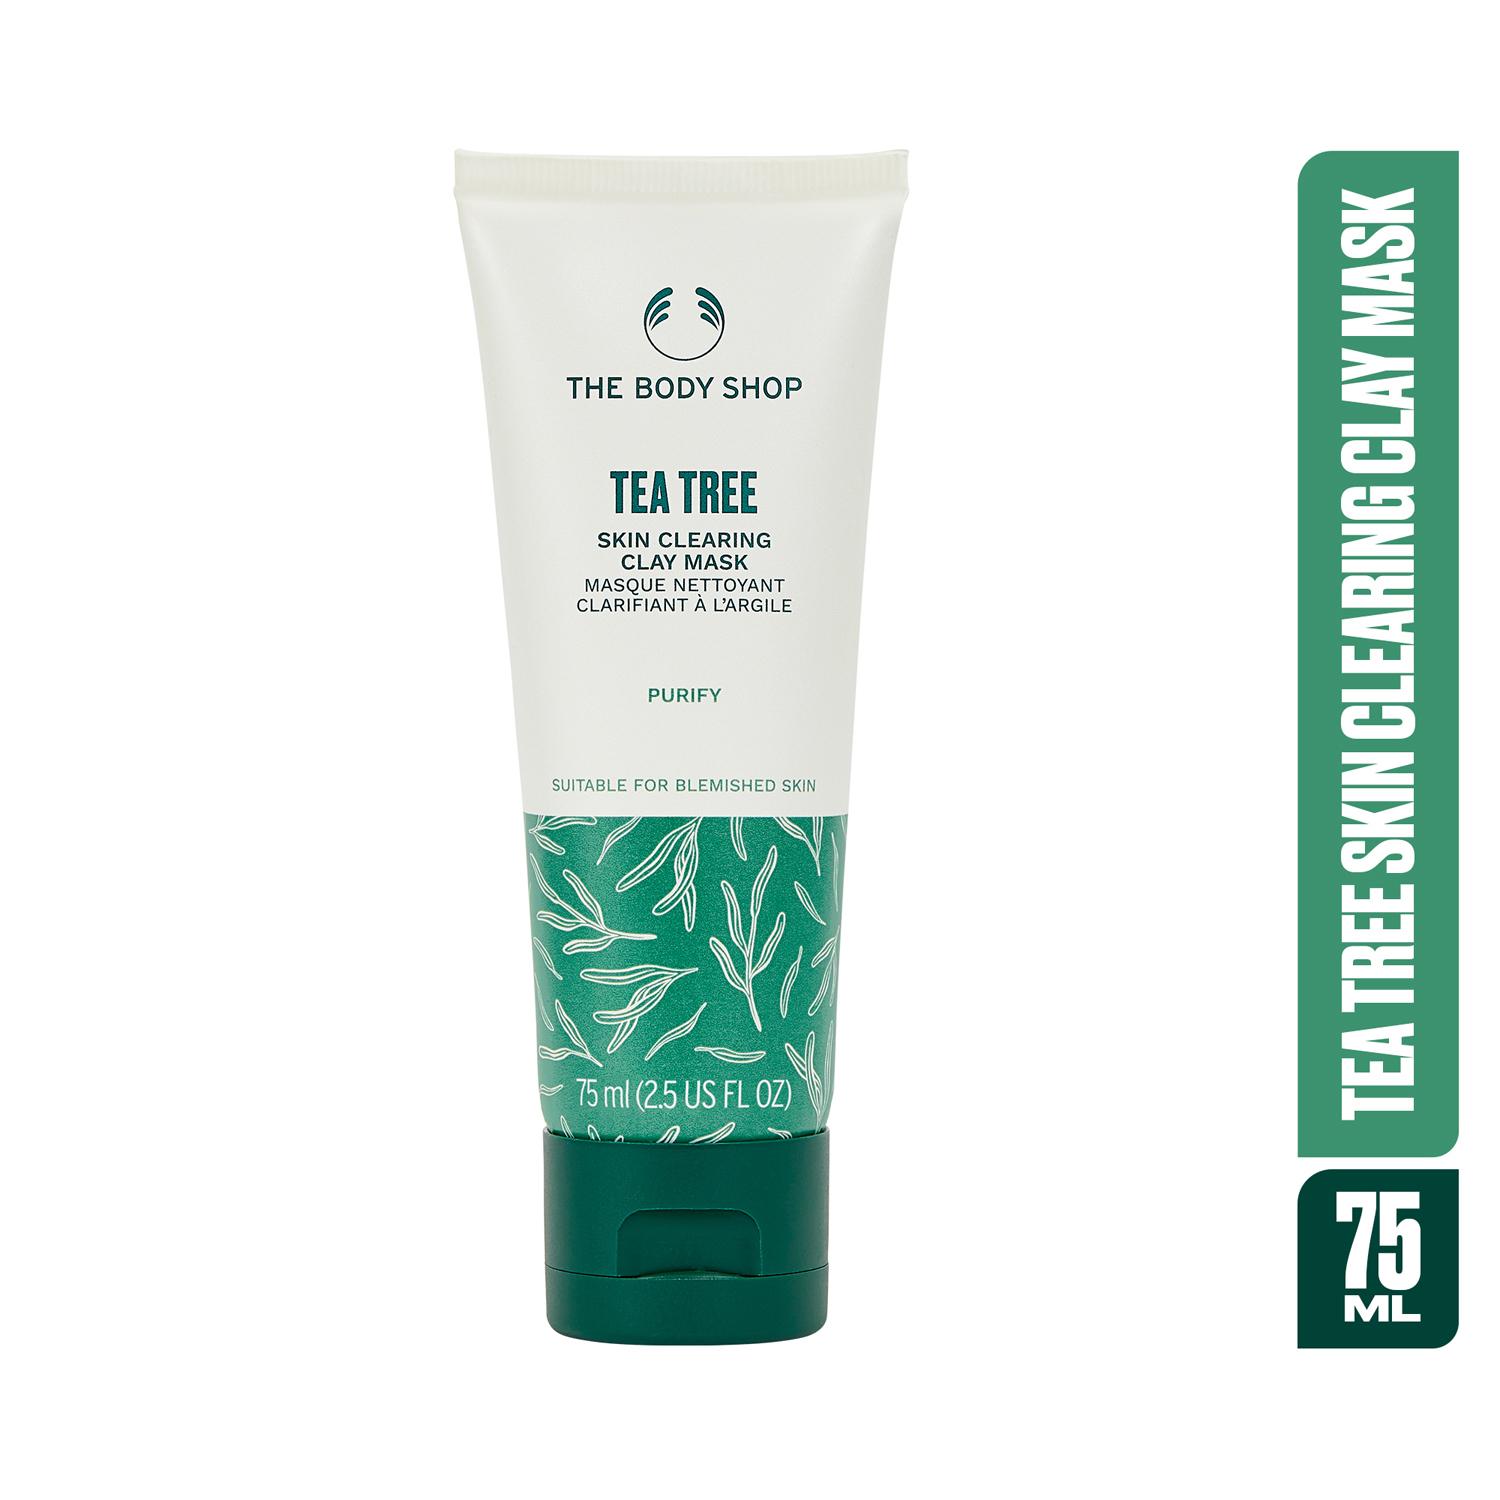 The Body Shop | The Body Shop Tea Tree Skin Clearing Clay Mask (75ml)